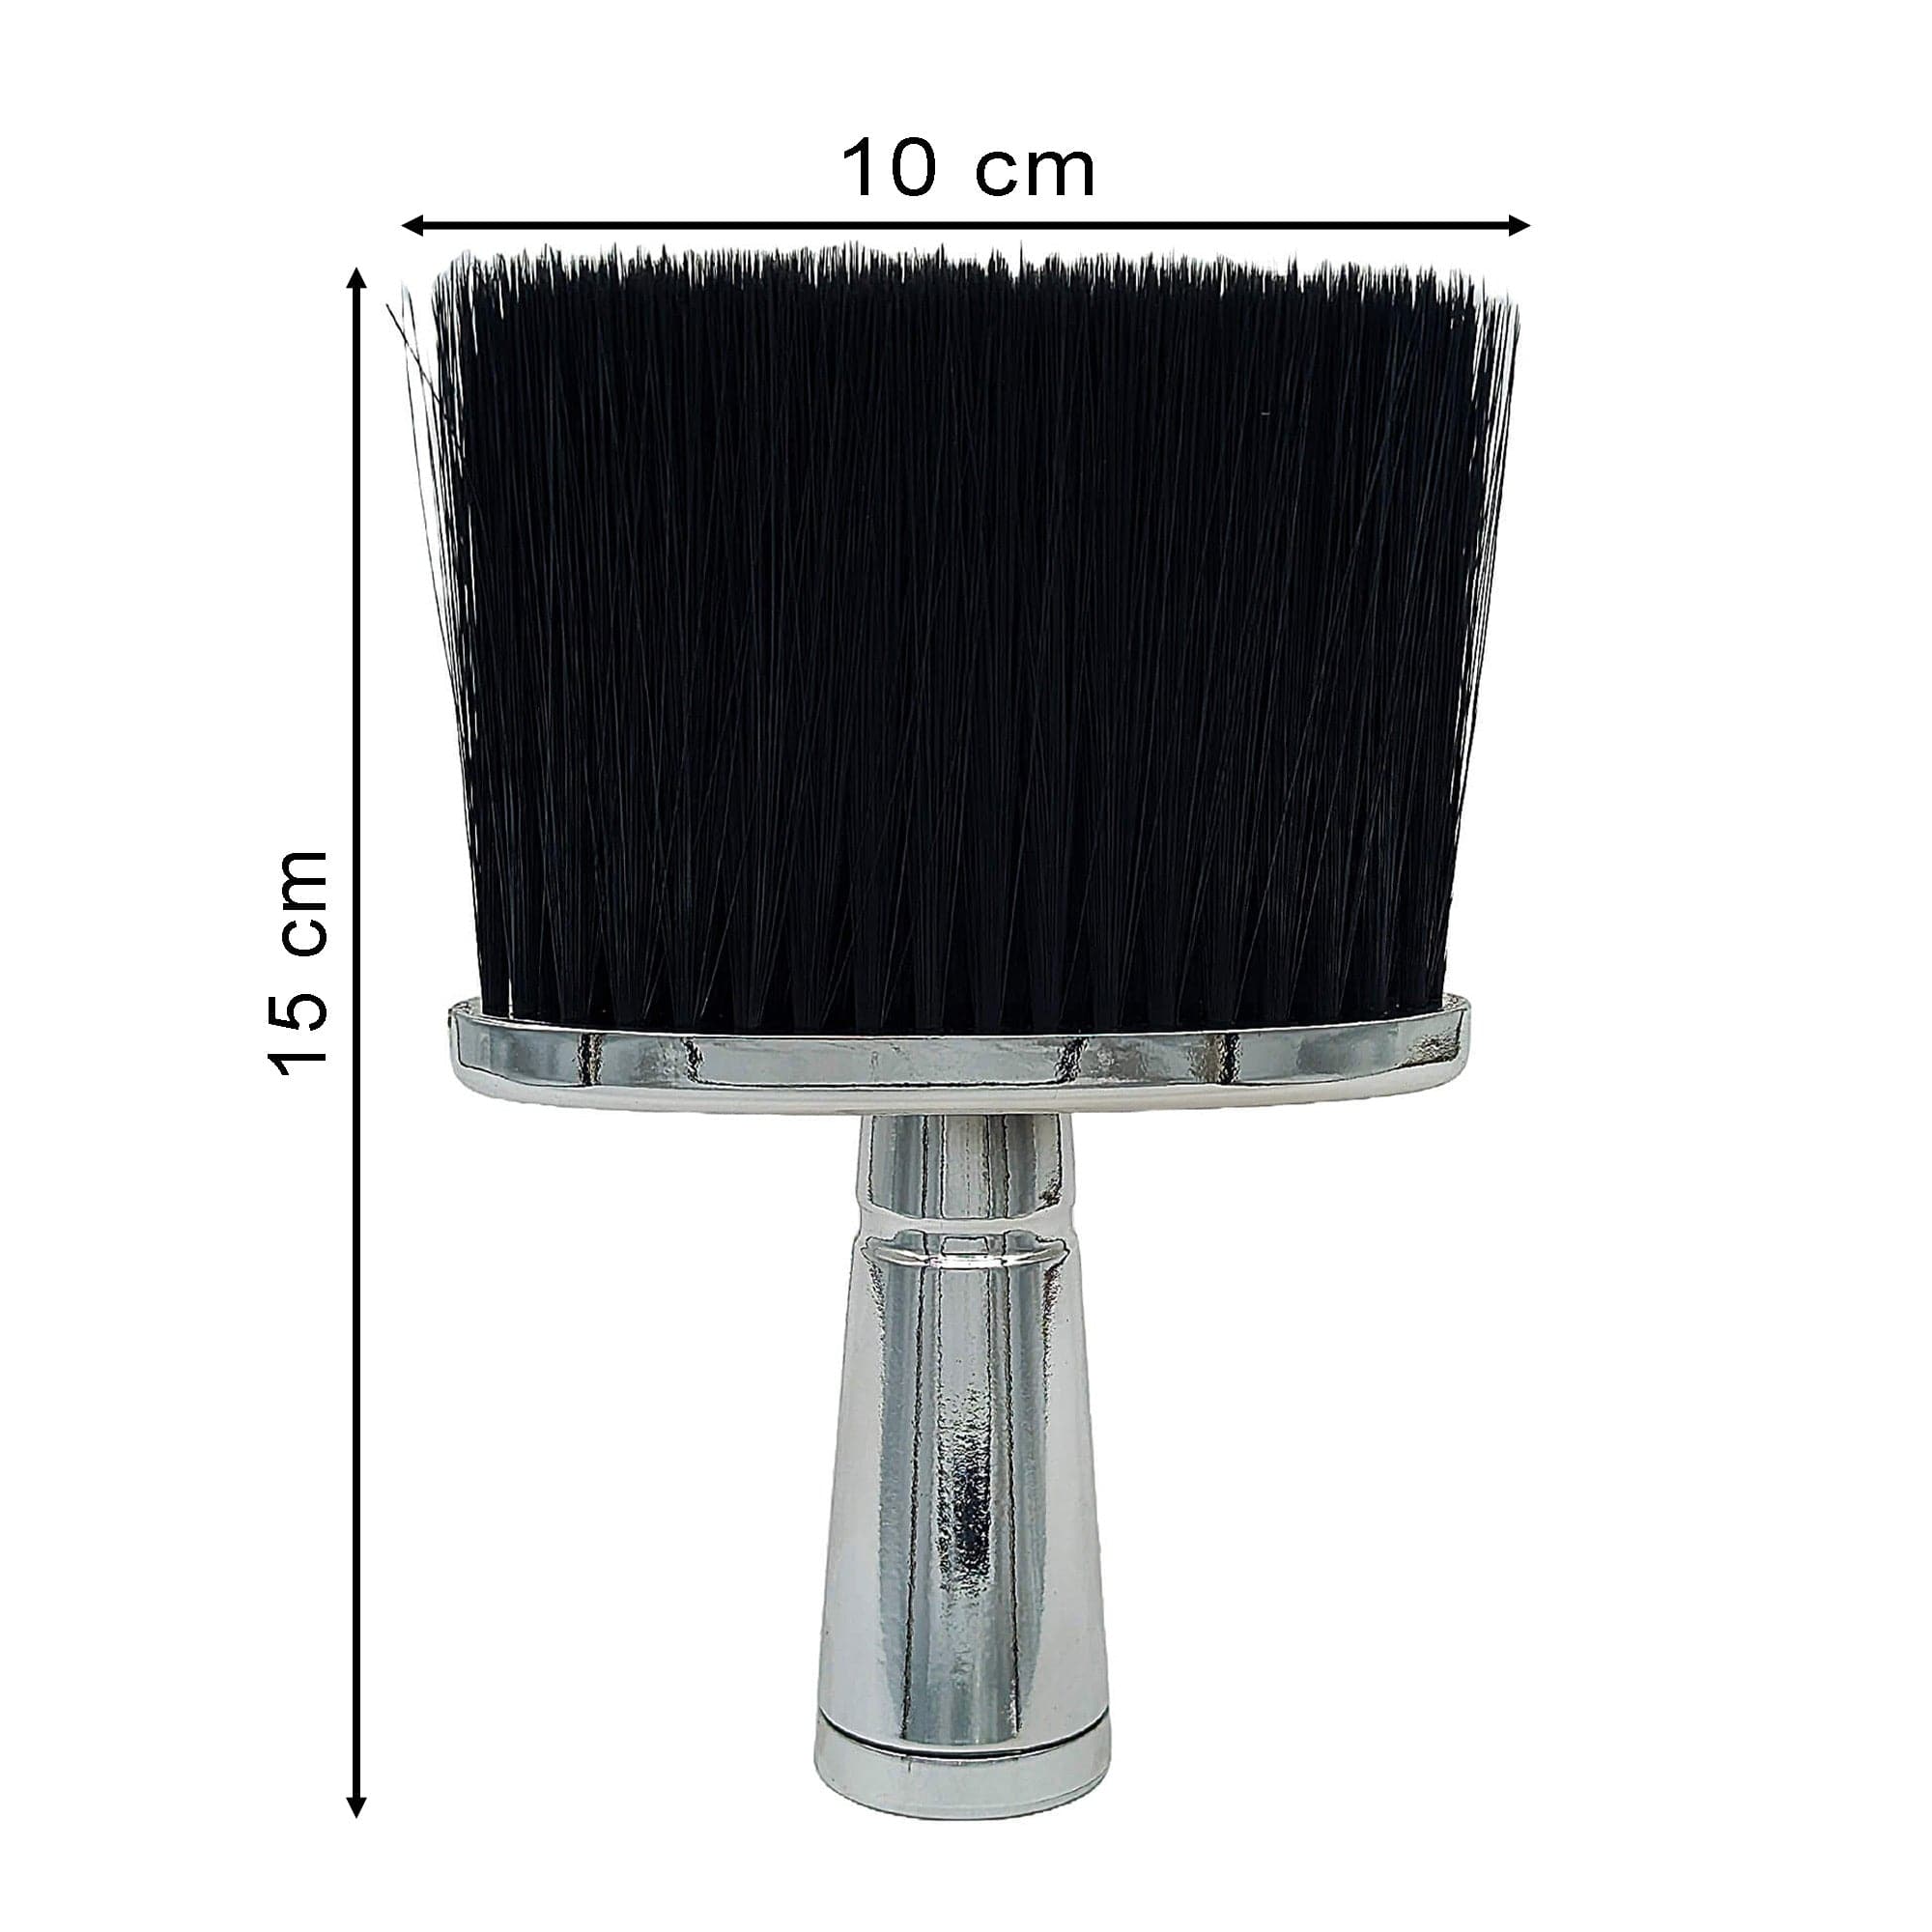 Eson - Neck Duster Brush Ultra-Soft Comfort During Use 15x10cm (Silver) - Eson Direct